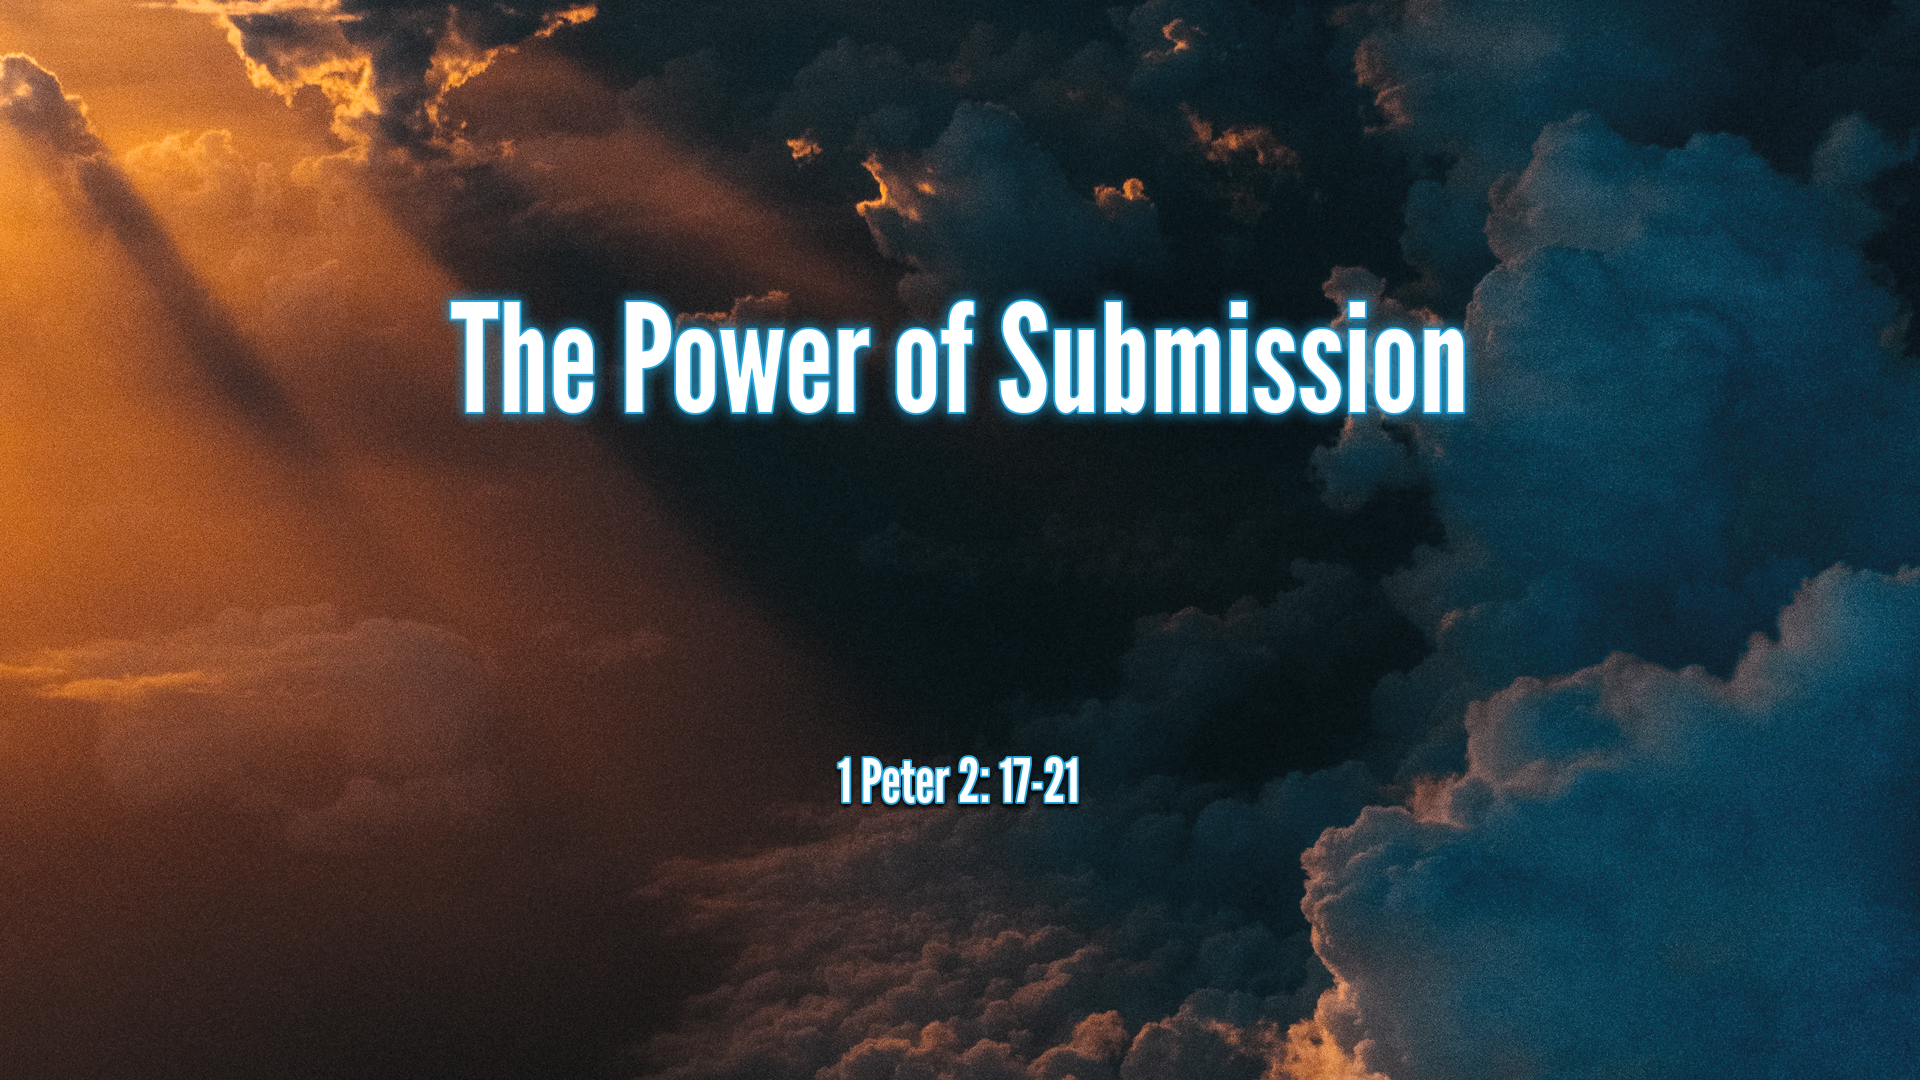 Sep 18, 2022 - The Power of Submission (Video) - 1 Peter 2: 17-21